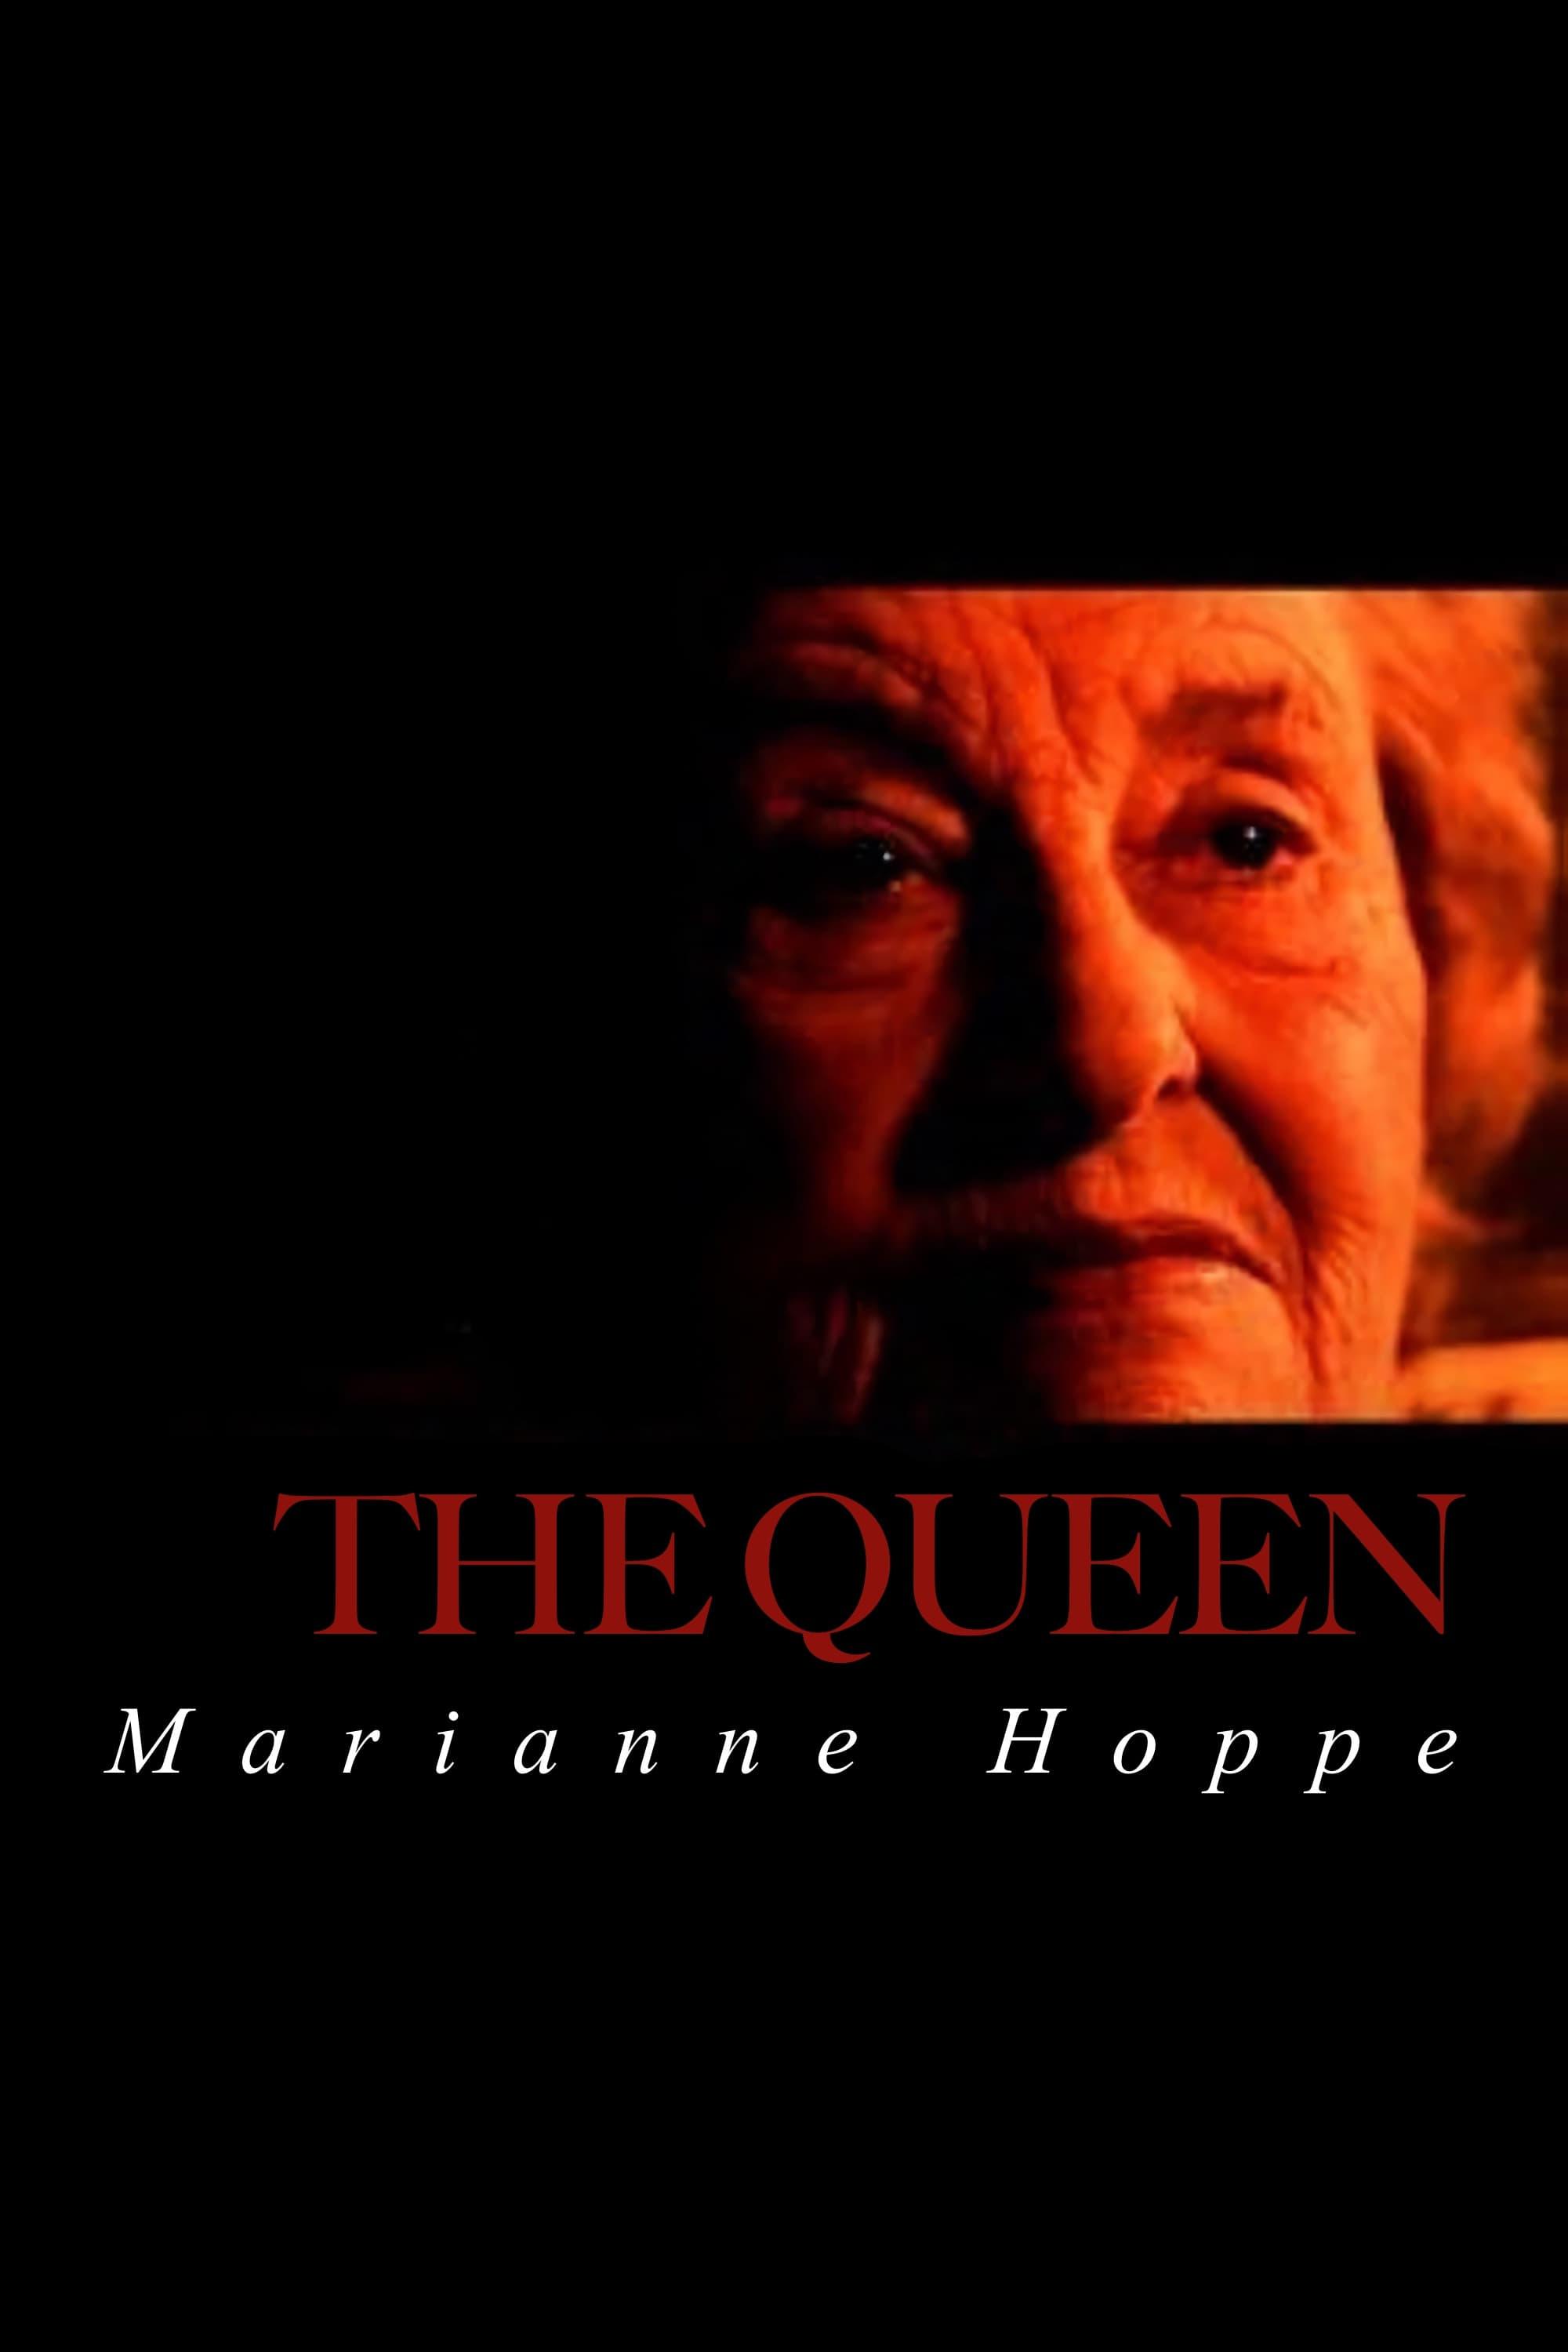 The Queen – Marianne Hoppe poster